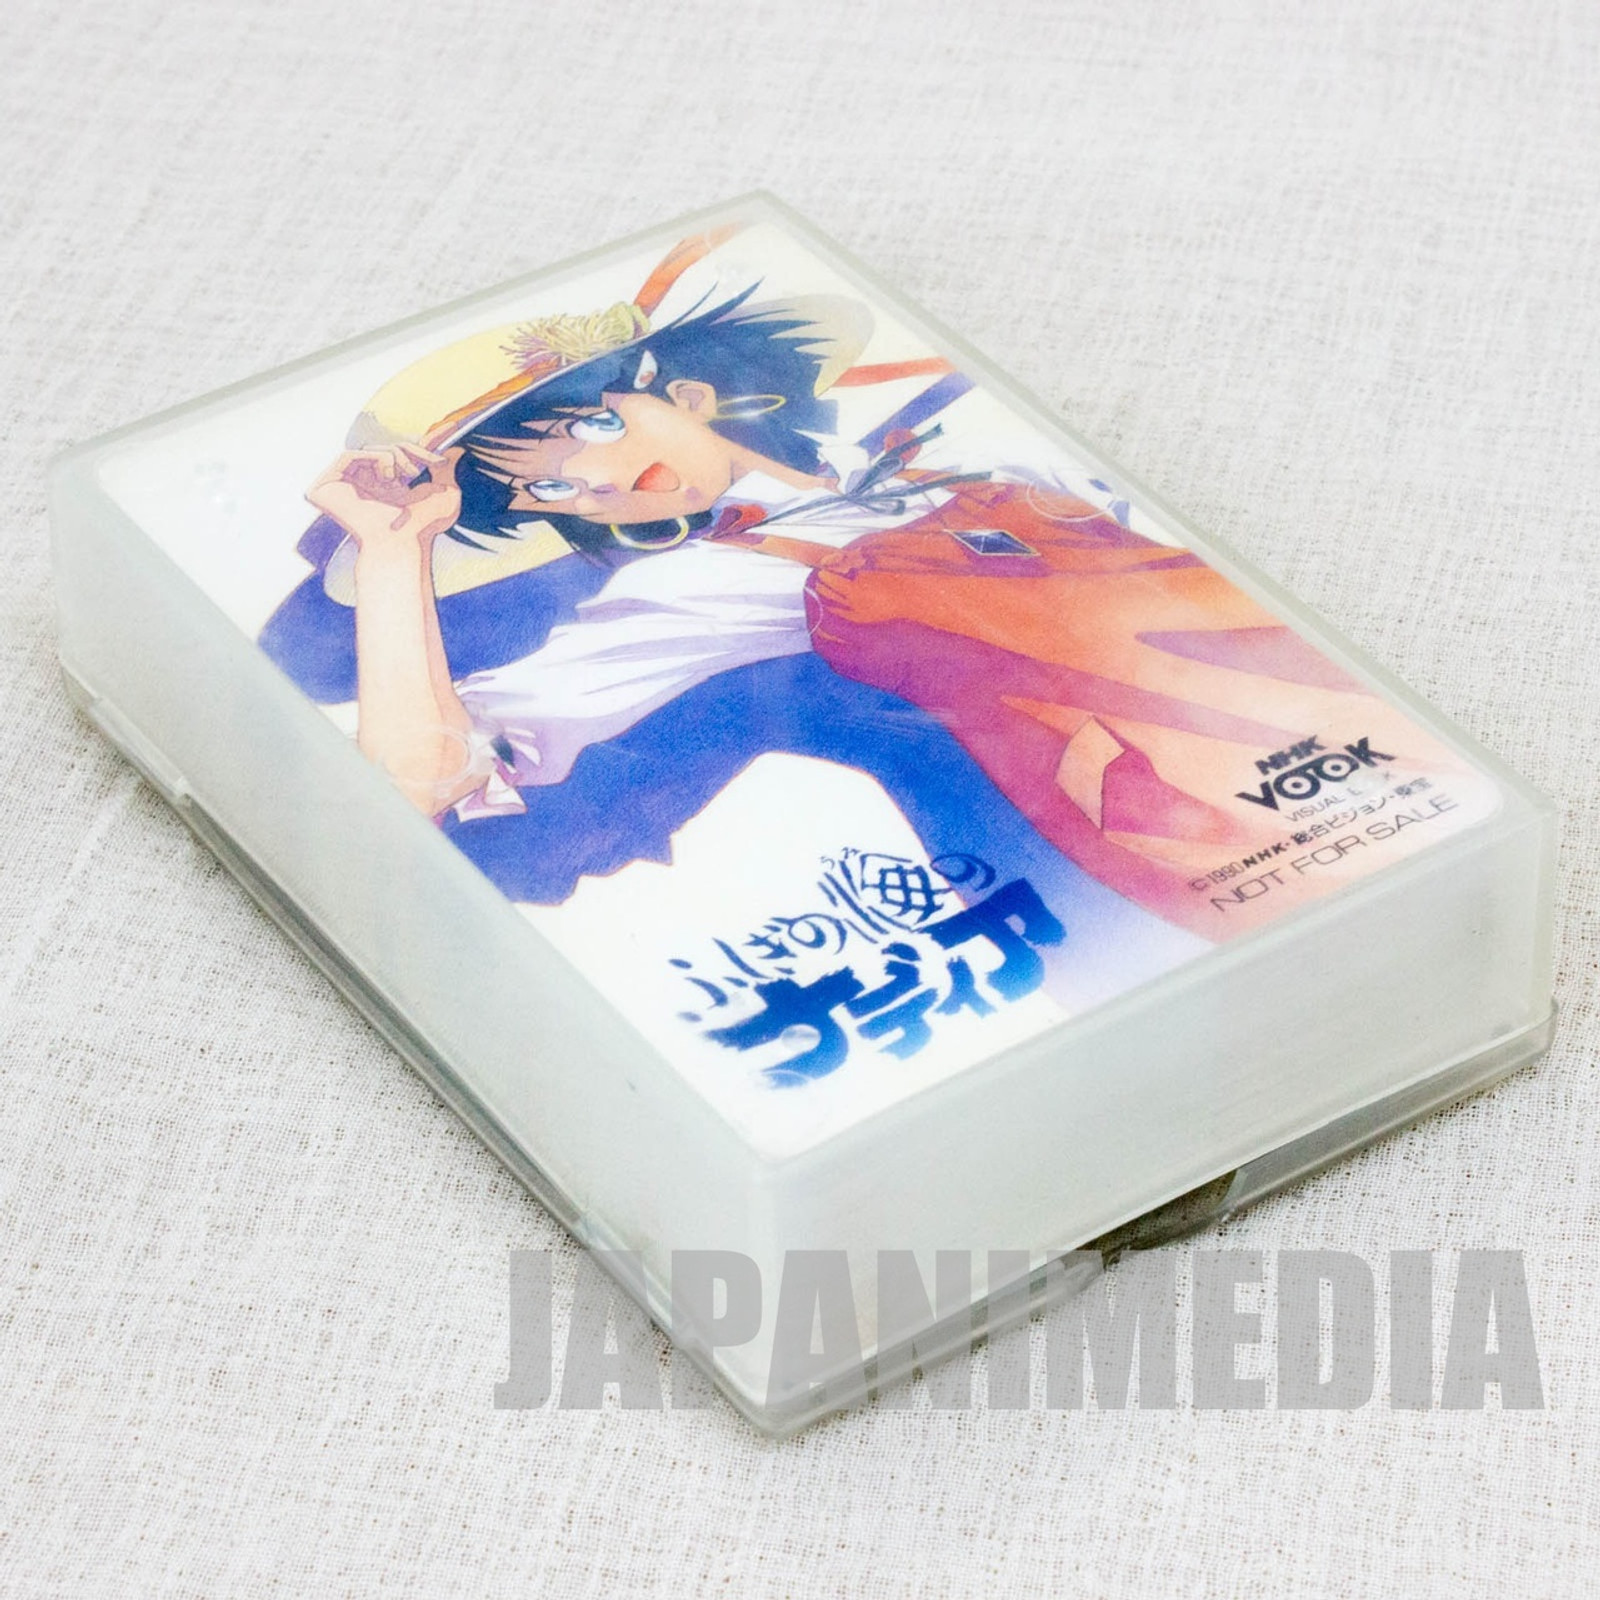 RARE! Nadia The Secret of Blue Water Trump Playing Cards NHK VOOK JAPAN ANIME